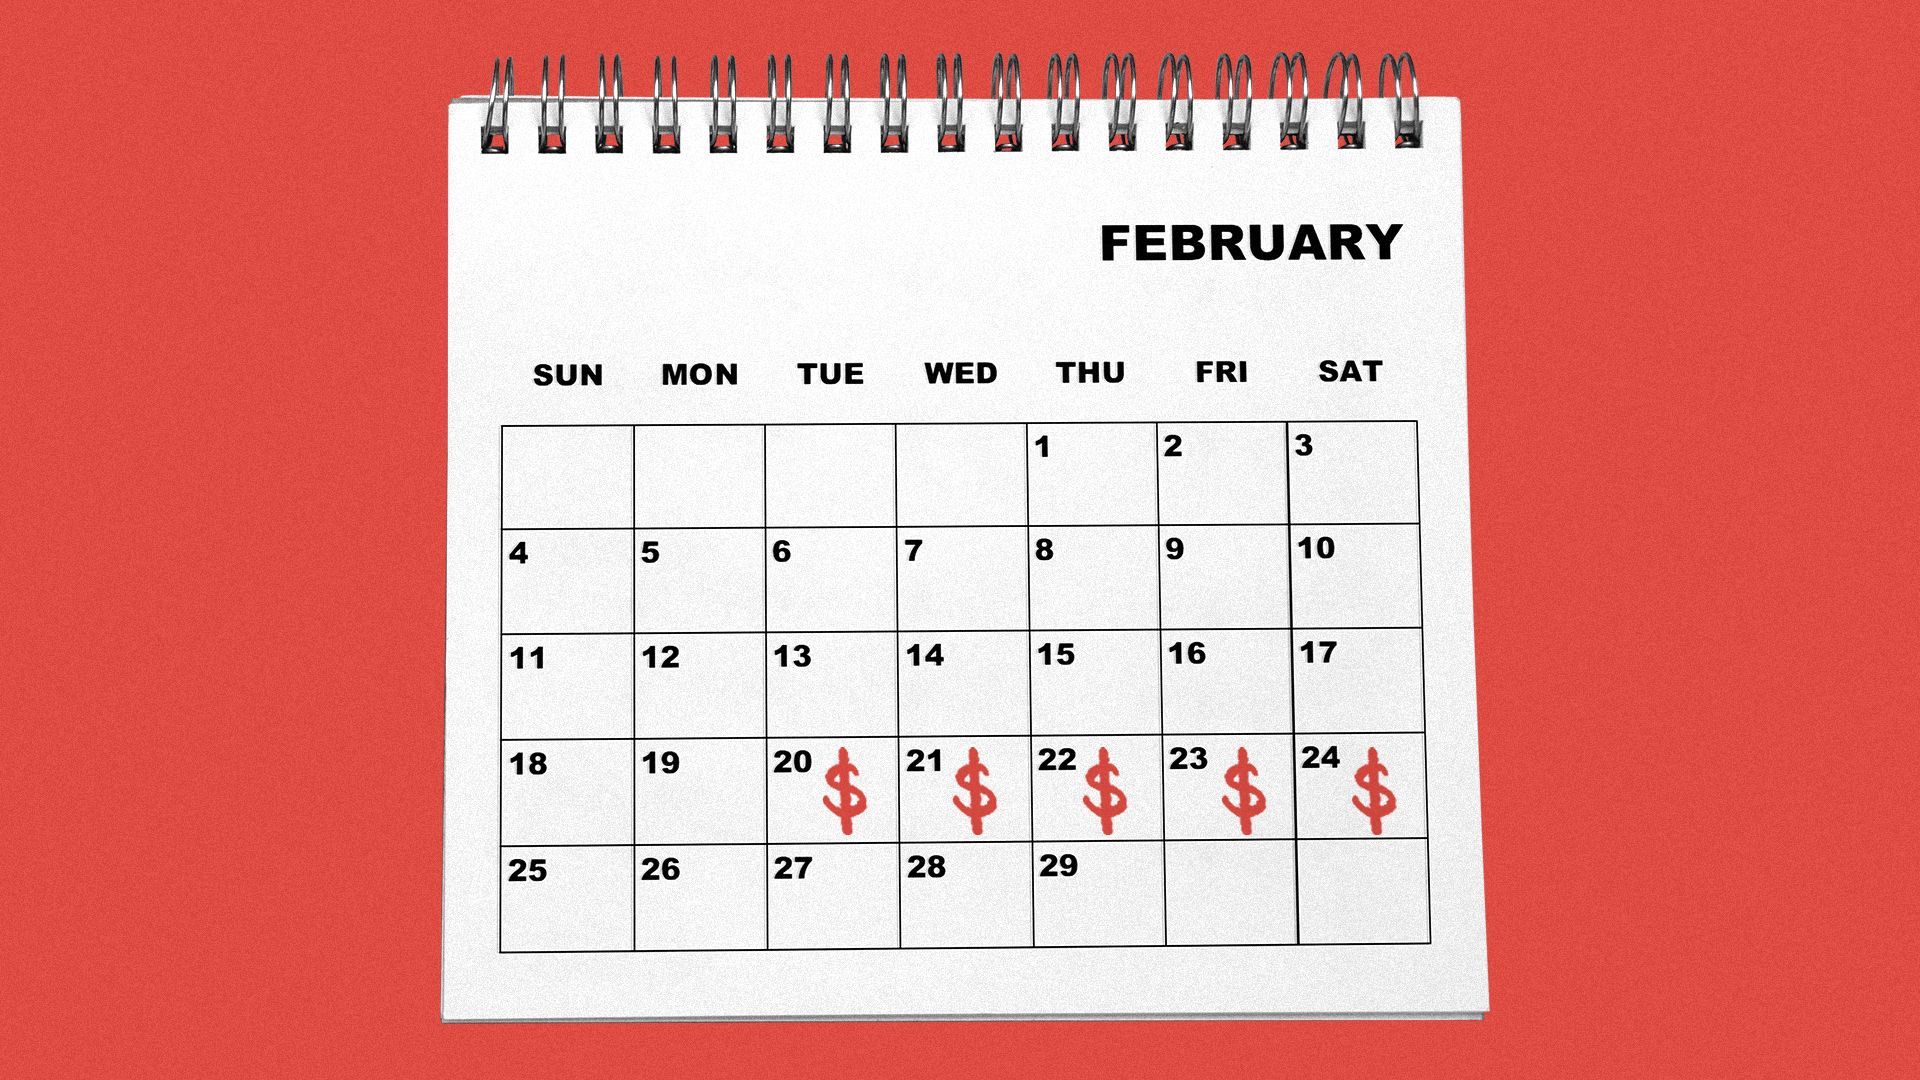 Illustration of five dollar signs across five days on a calendar.